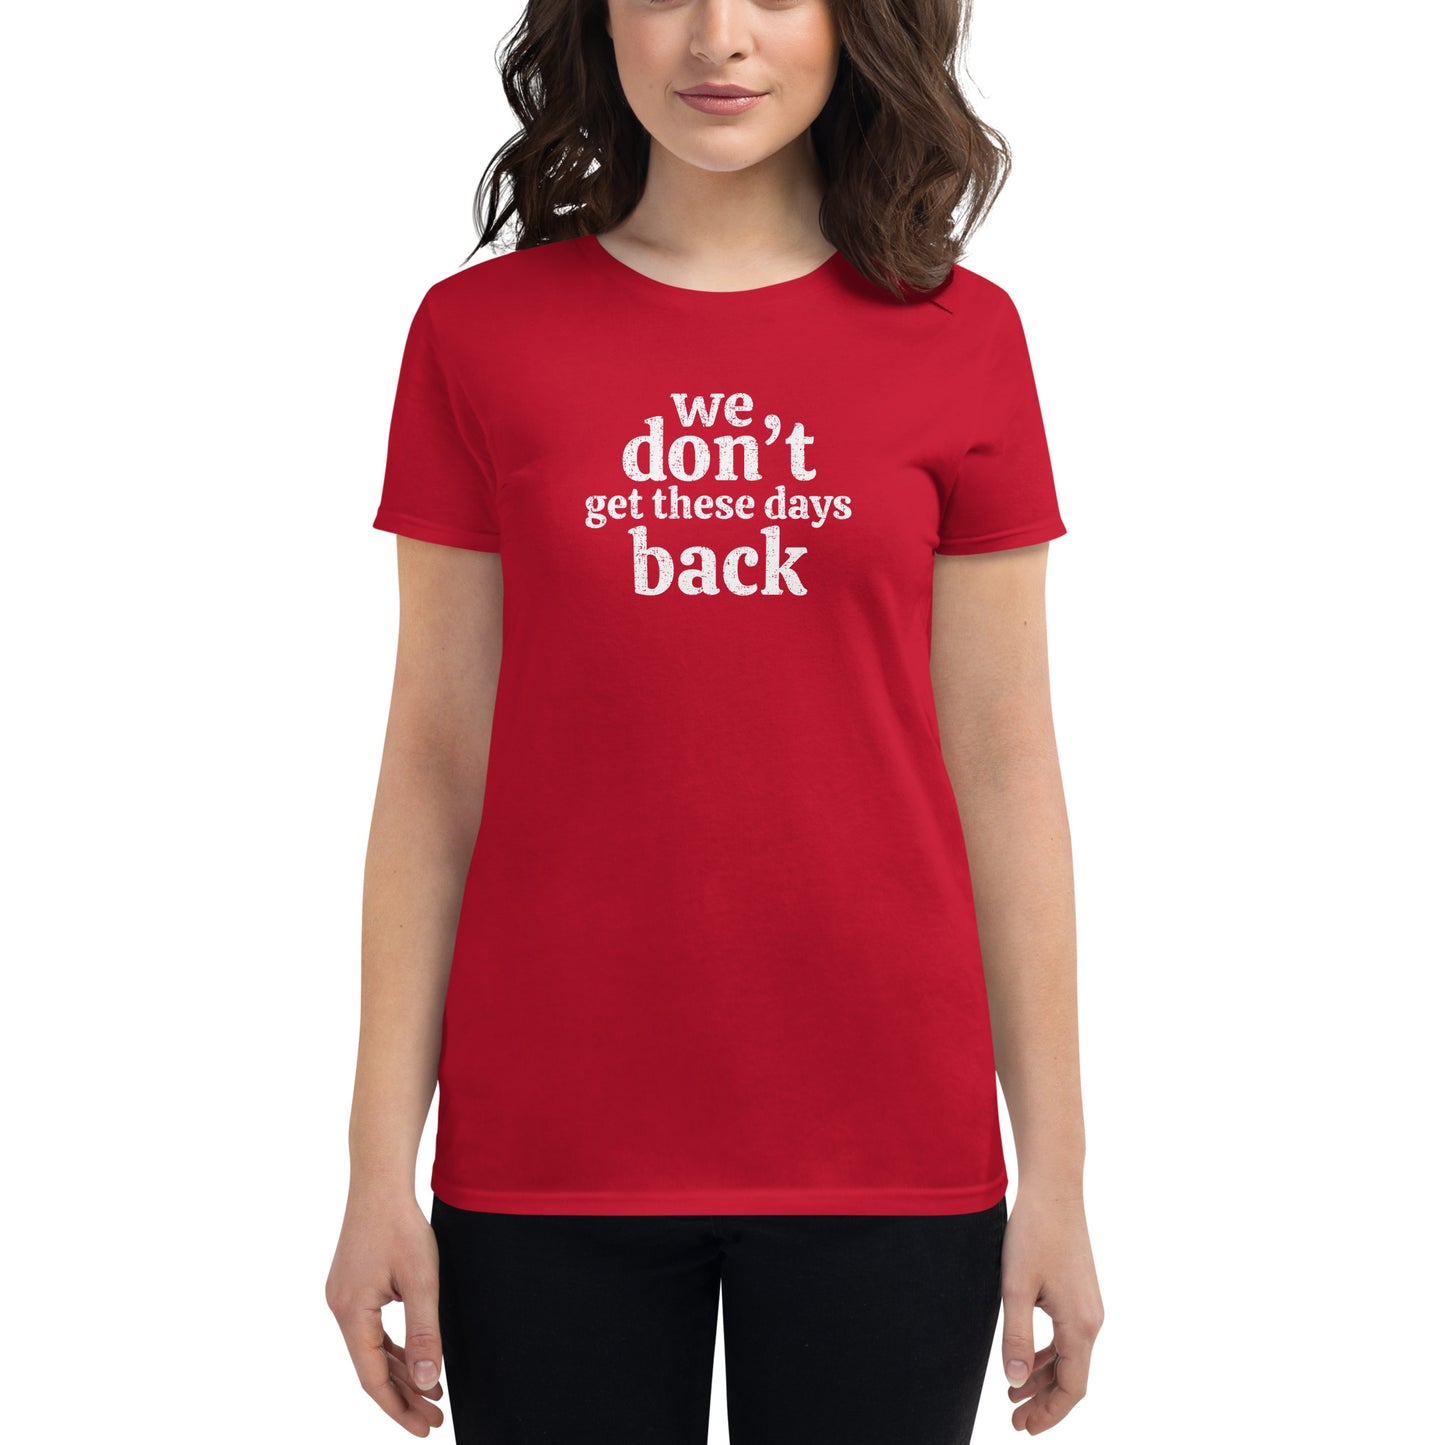 Women's Fashion Fit Tee - We Don't Get These Days Back